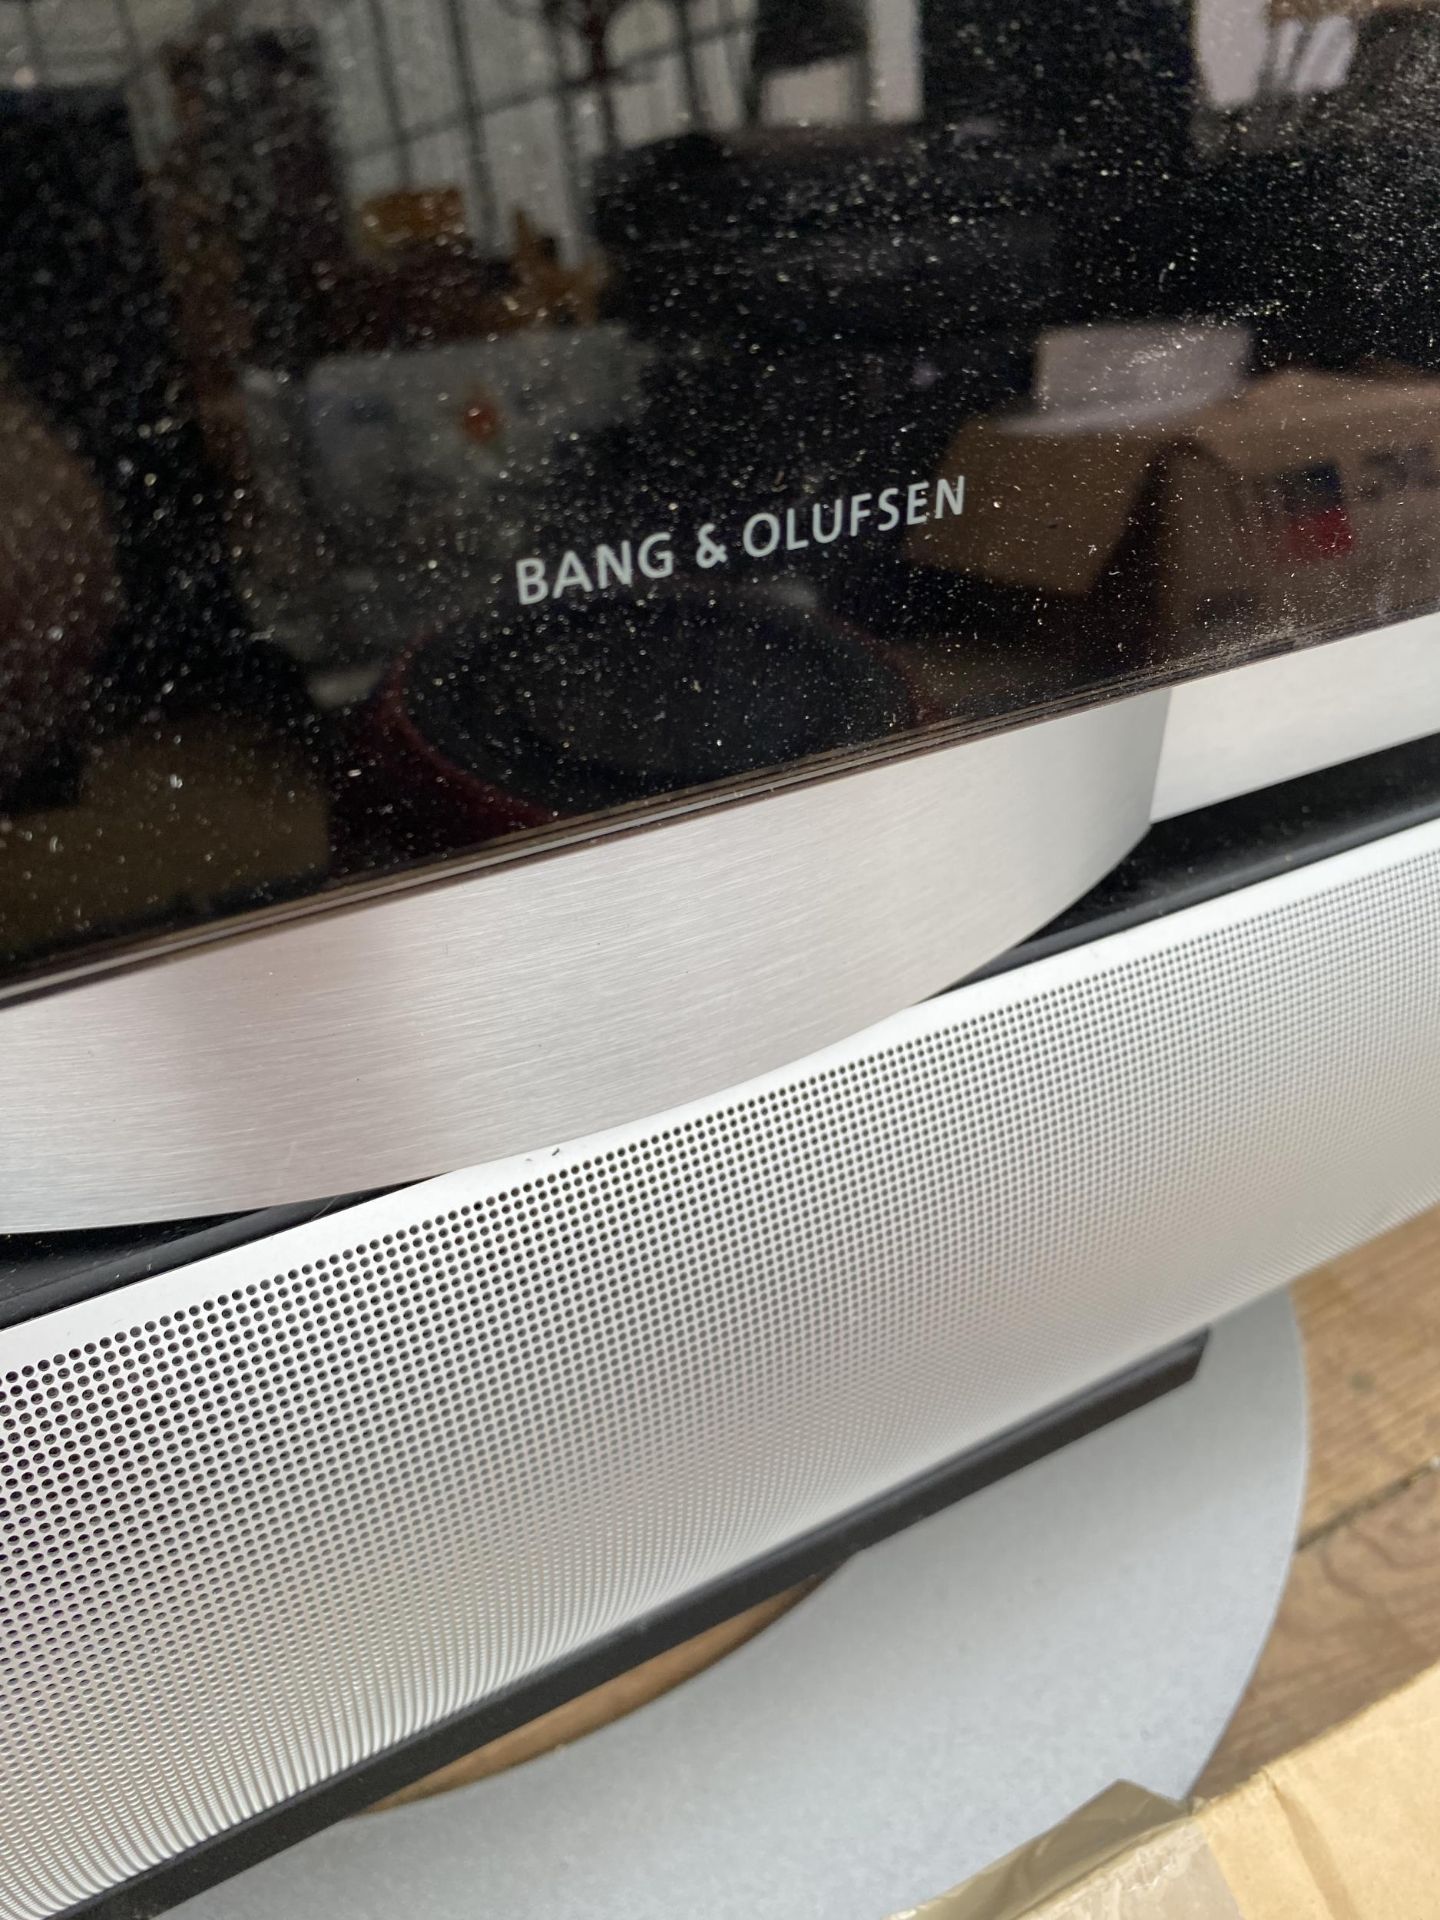 A BANG AND OLUFSEN 39" TELEVISION COMPLETE WITH SOUND BAR AND A SURROUND SOUND SPEAKER SYSTEM AND - Image 4 of 6